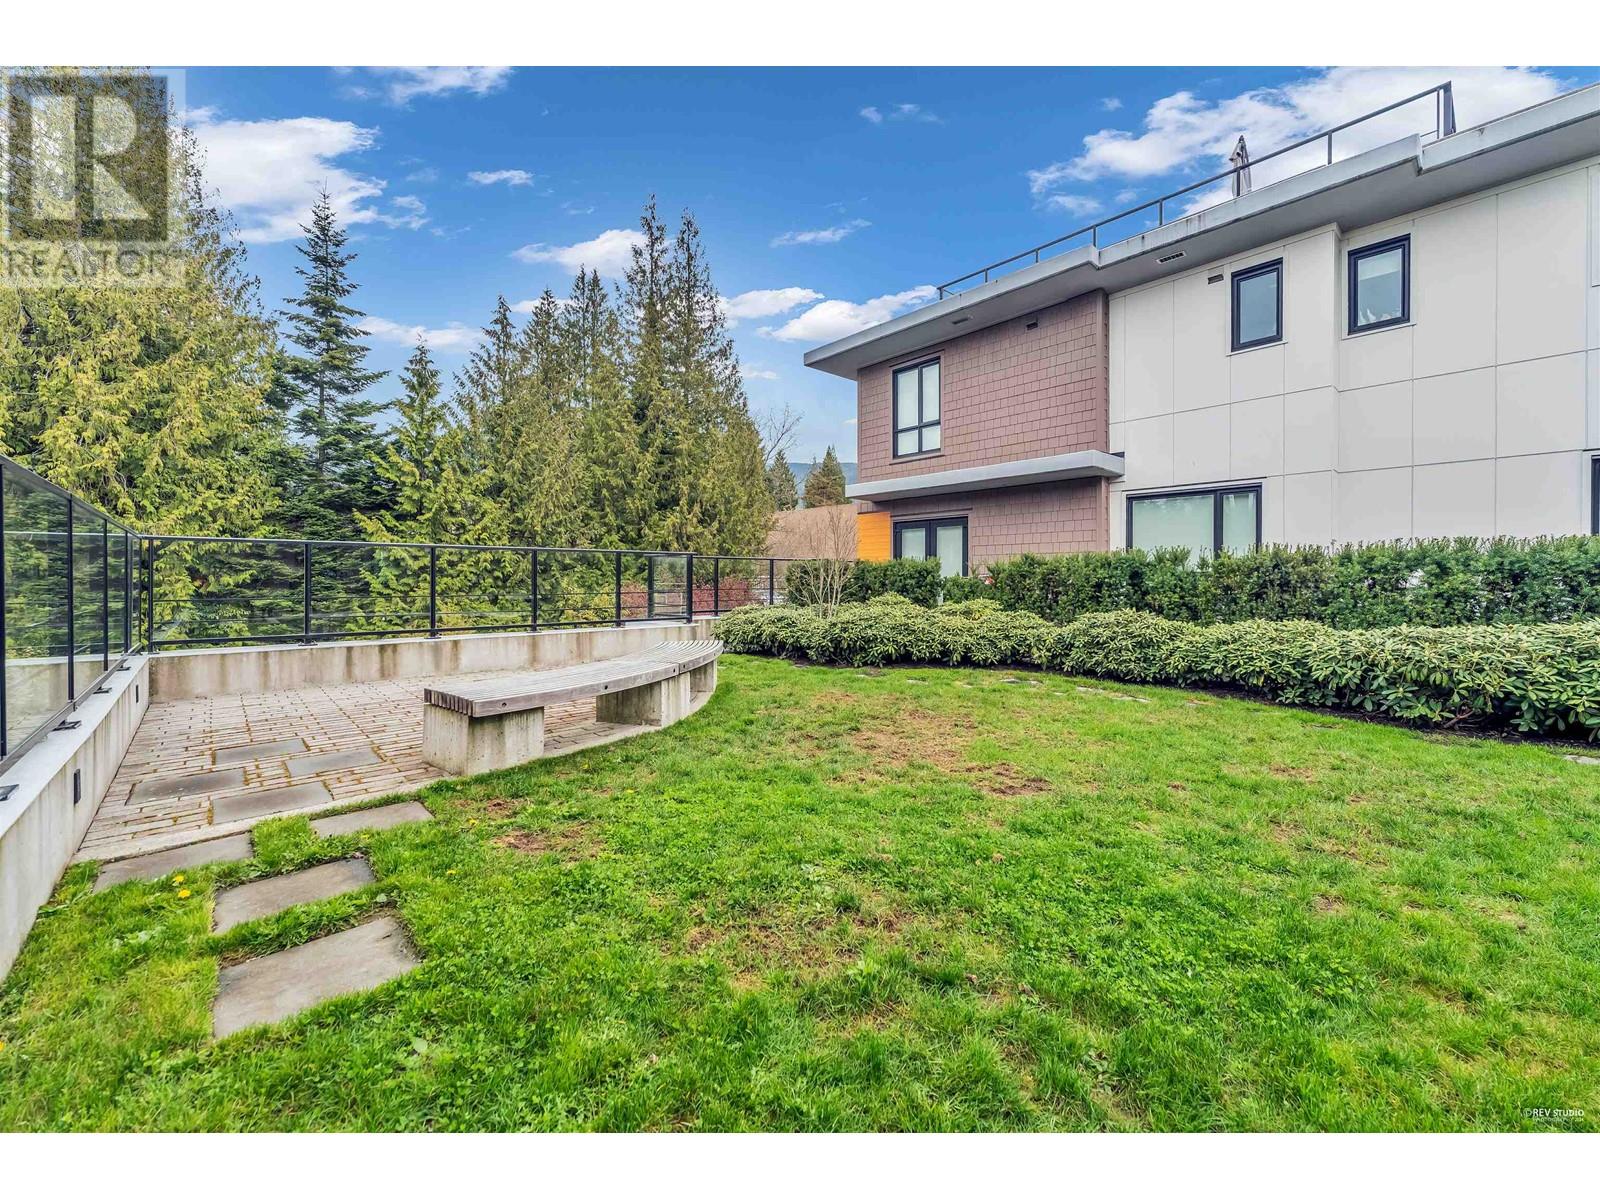 218 3220 CONNAUGHT CRESCENT, North Vancouver